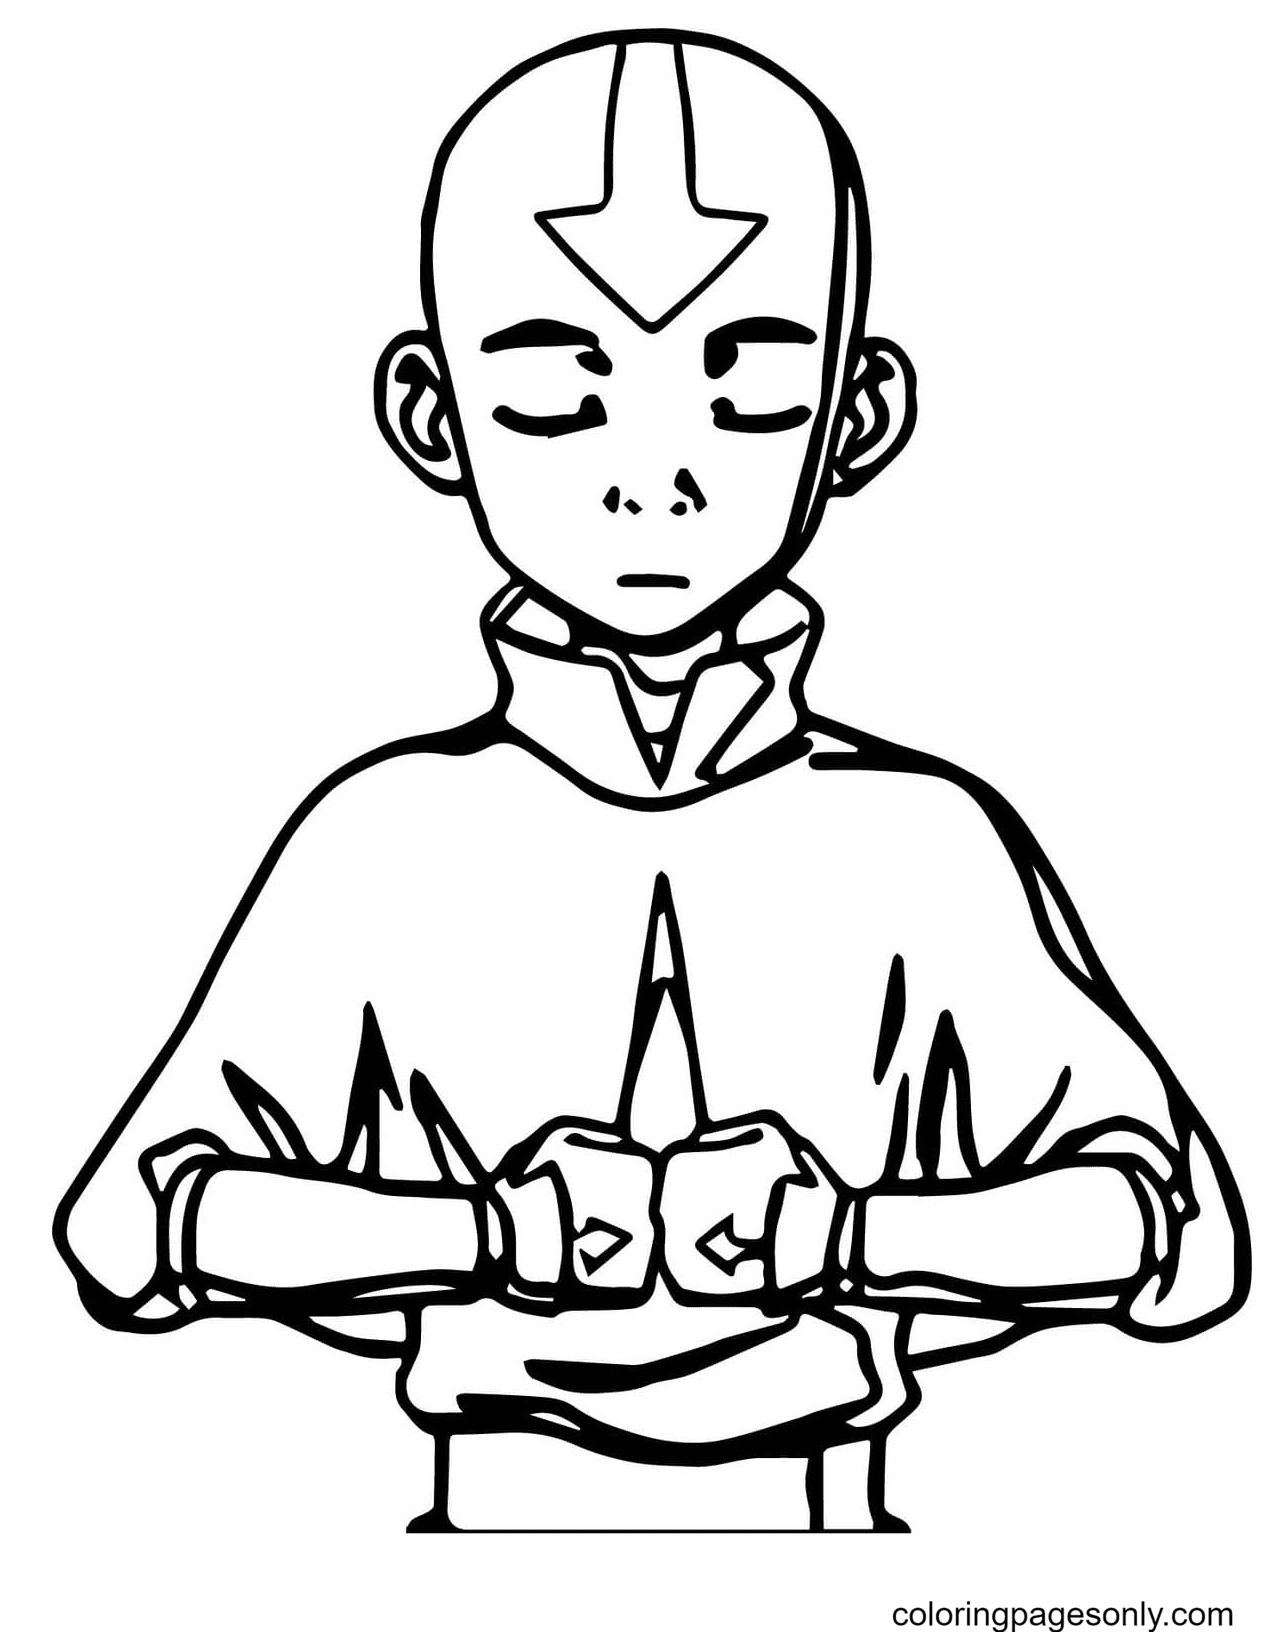 Aang with closed eyes Coloring Page